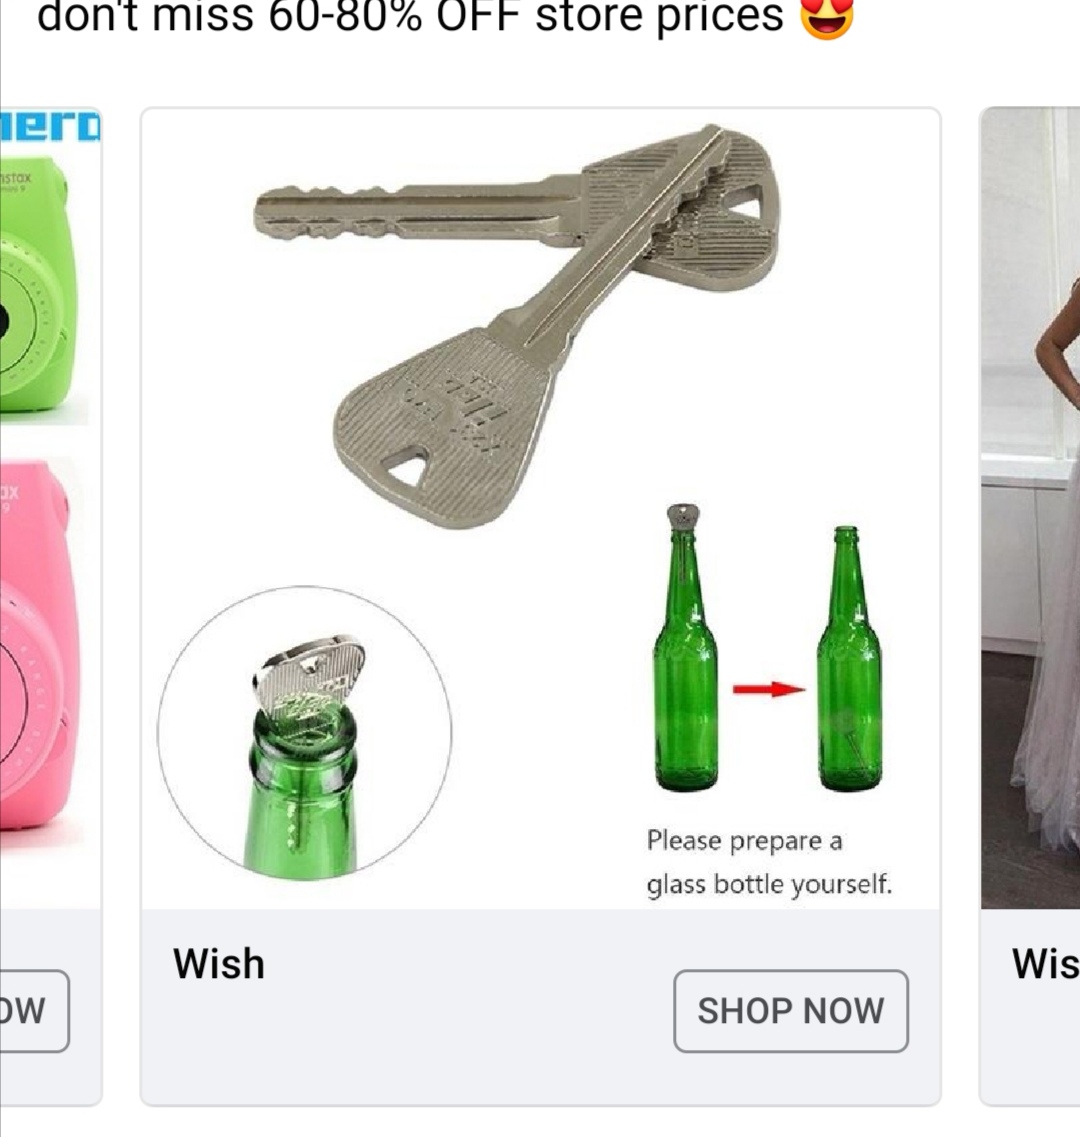 wish key bottle - don't miss 6080% Off store prices lern Tistax Please prepare a glass bottle yourself. Wish Wis Dw Shop Now